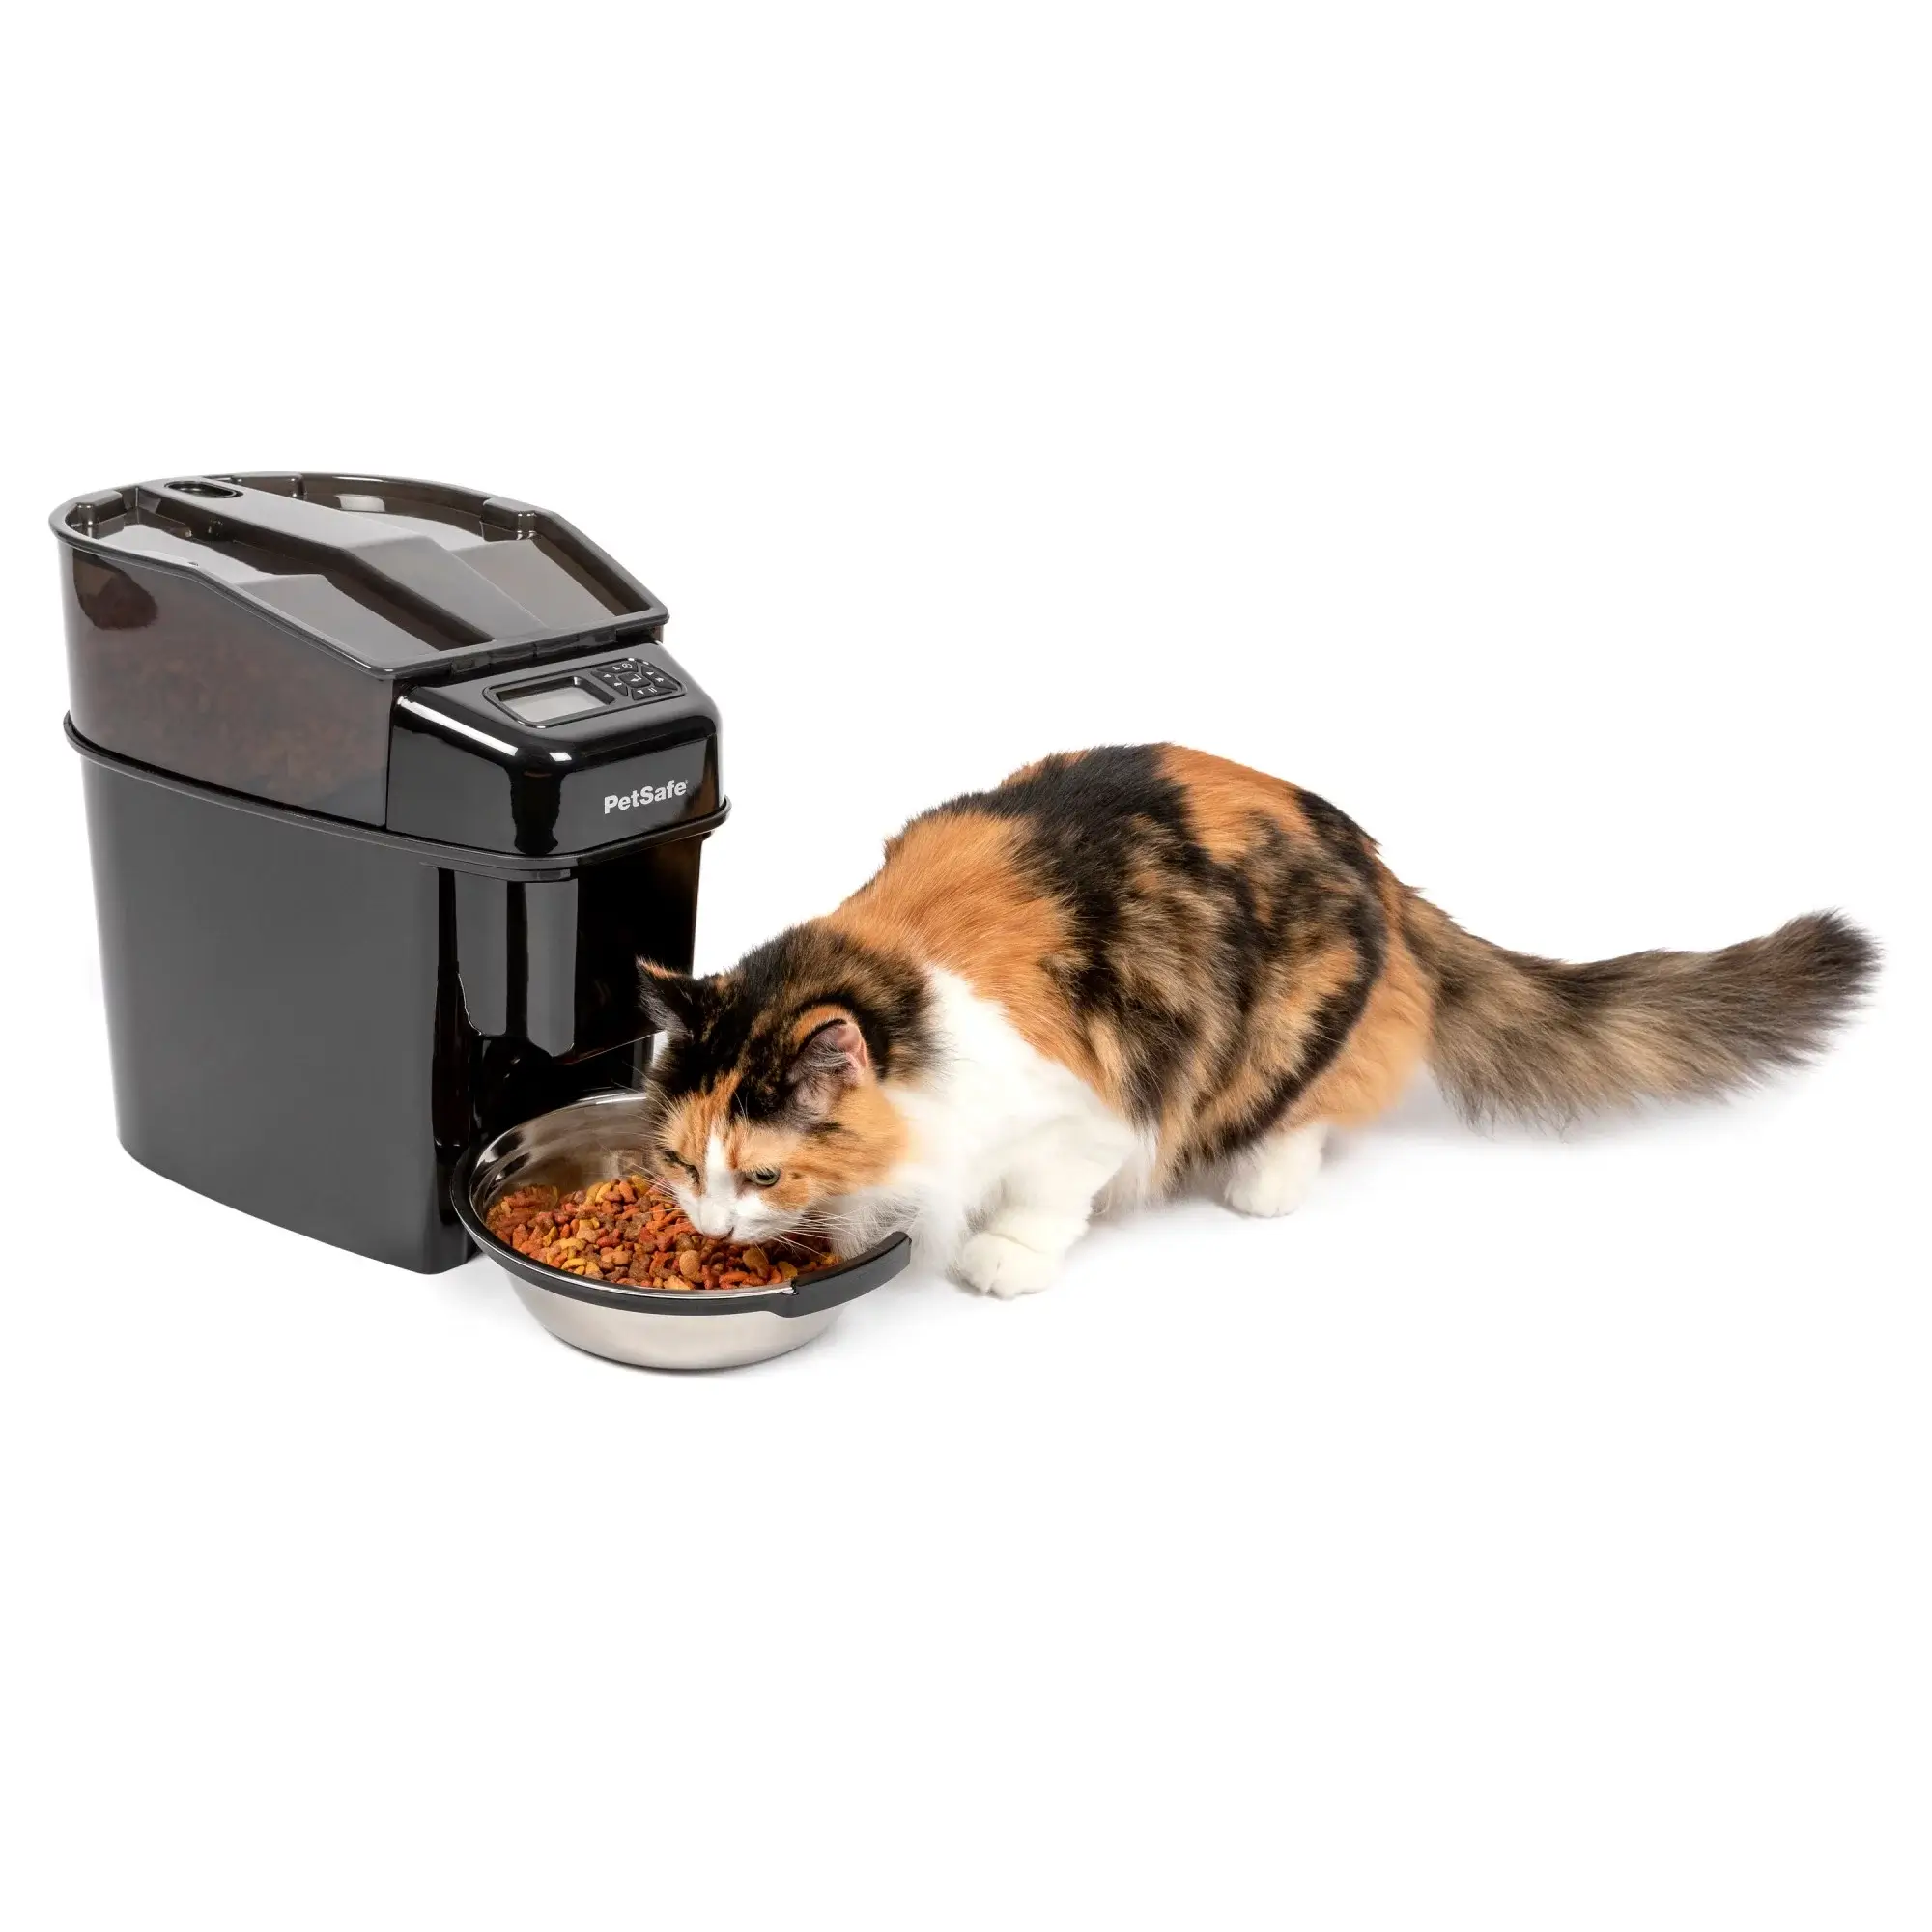 How to Get the Best Deals on Automatic Cat Feeders